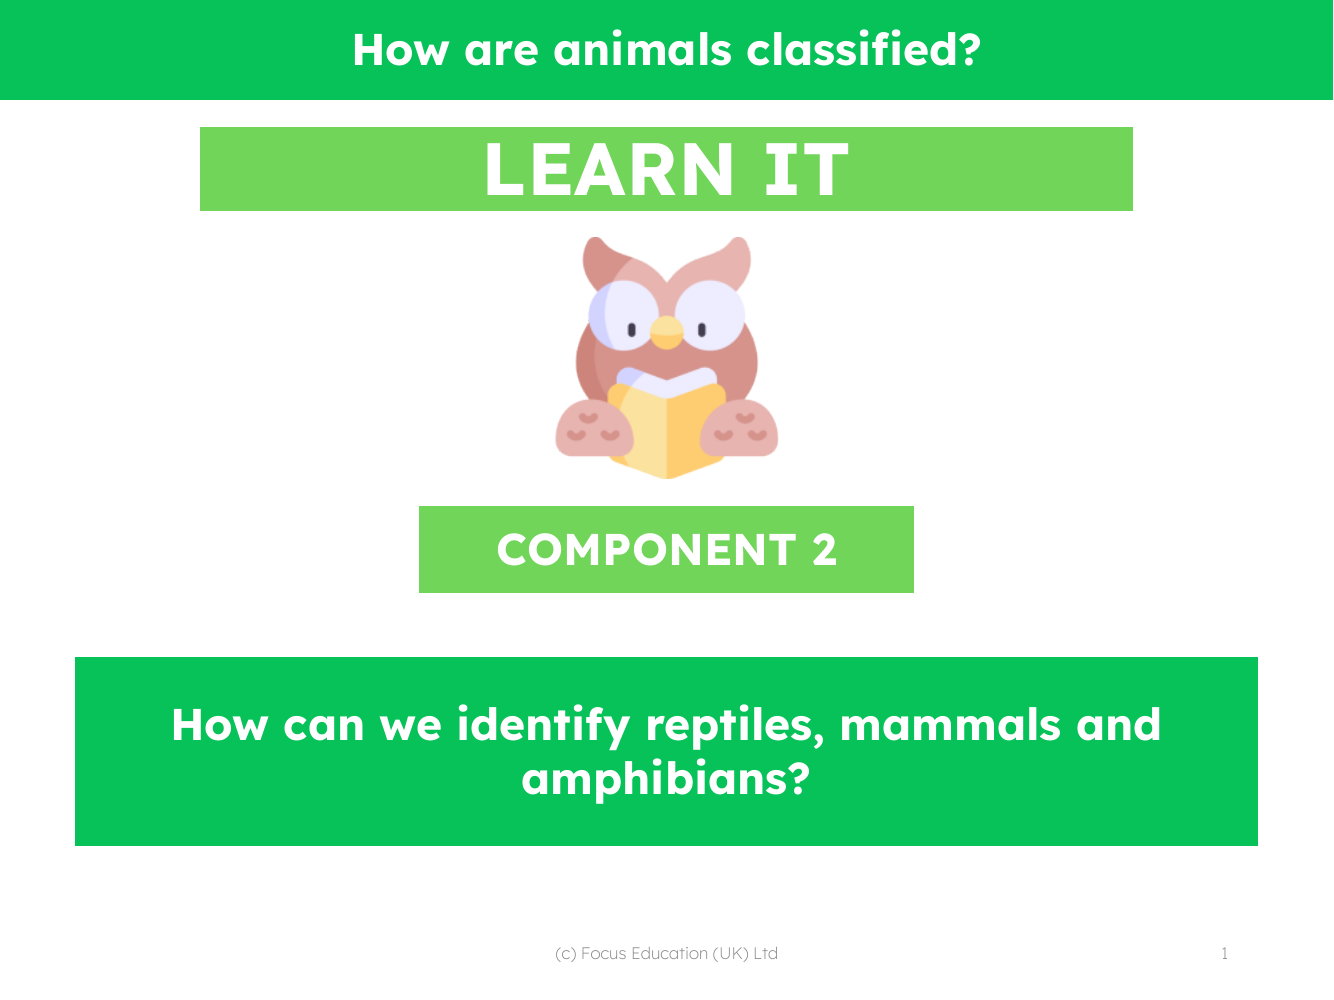 How can we identify reptiles, mammals and amphibians? - Presentation